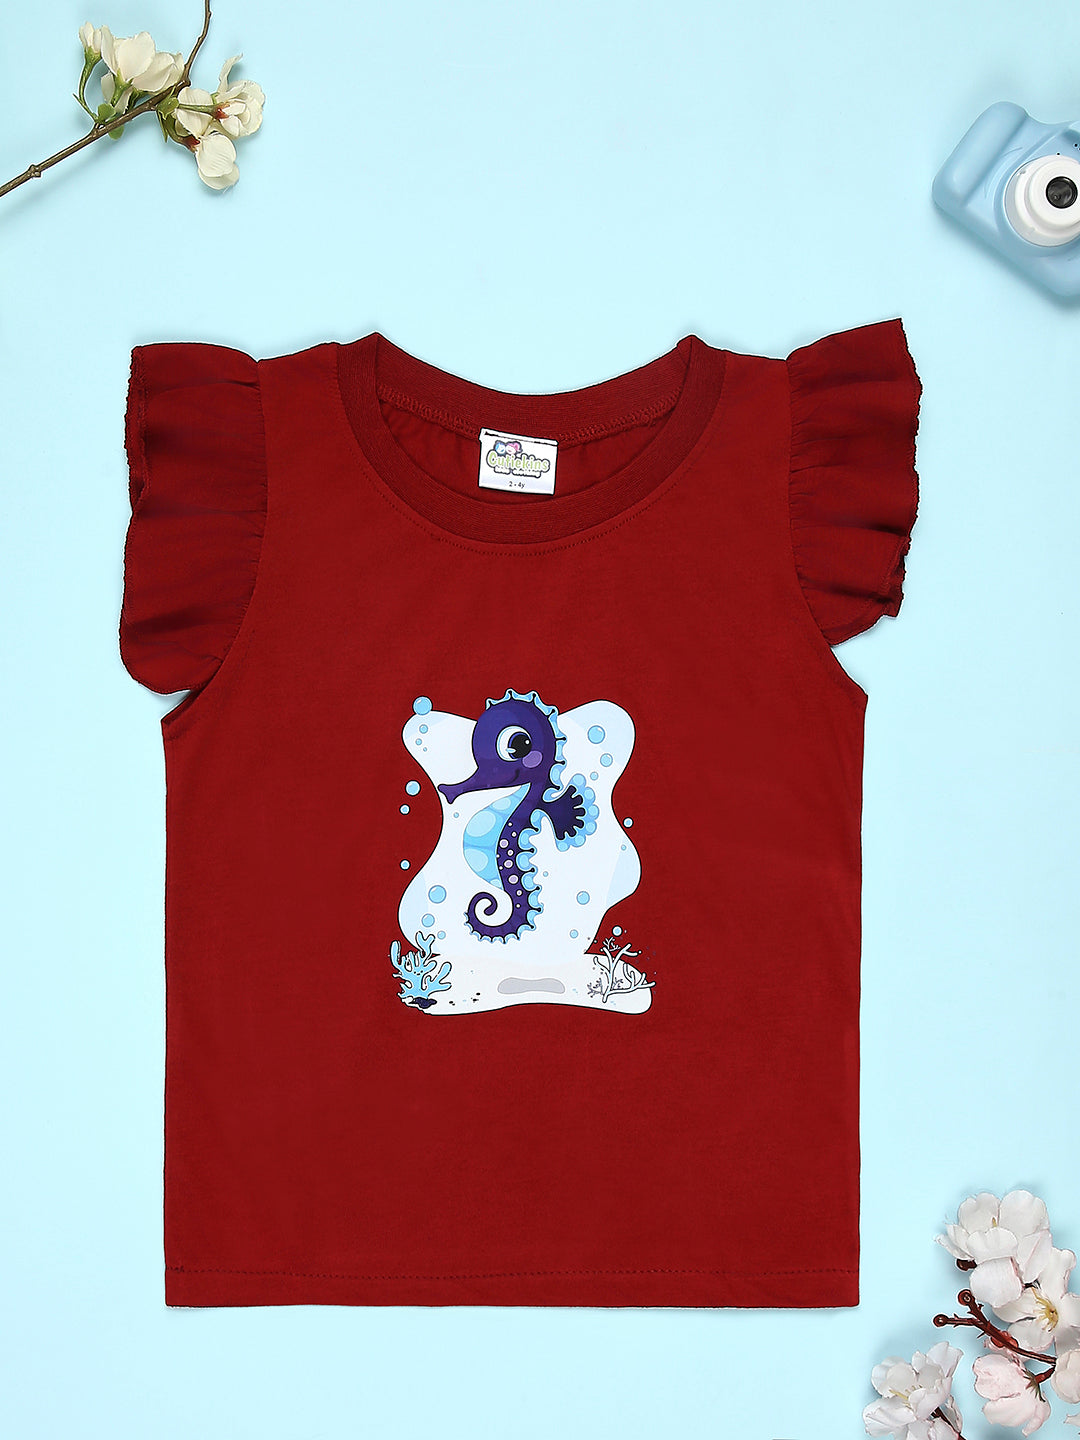 Cutiekins Girls Graphic Print T-Shirt With Solid Embellished Bow Short -Maroon & Navy Blue